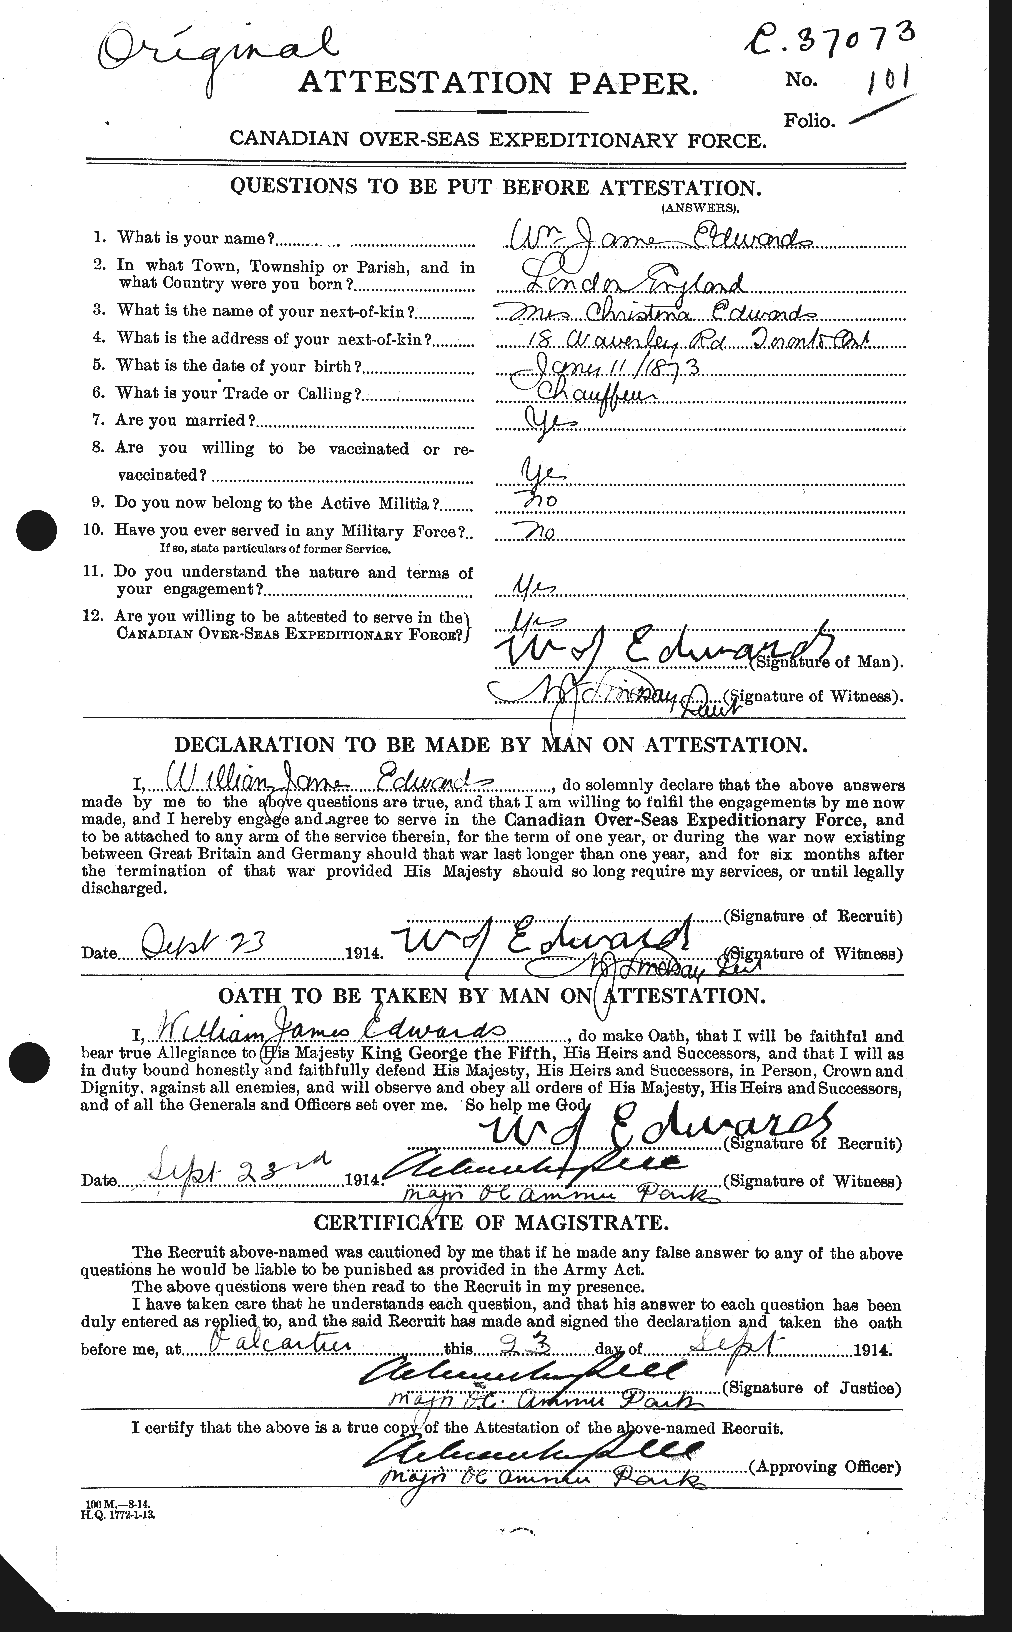 Personnel Records of the First World War - CEF 311922a